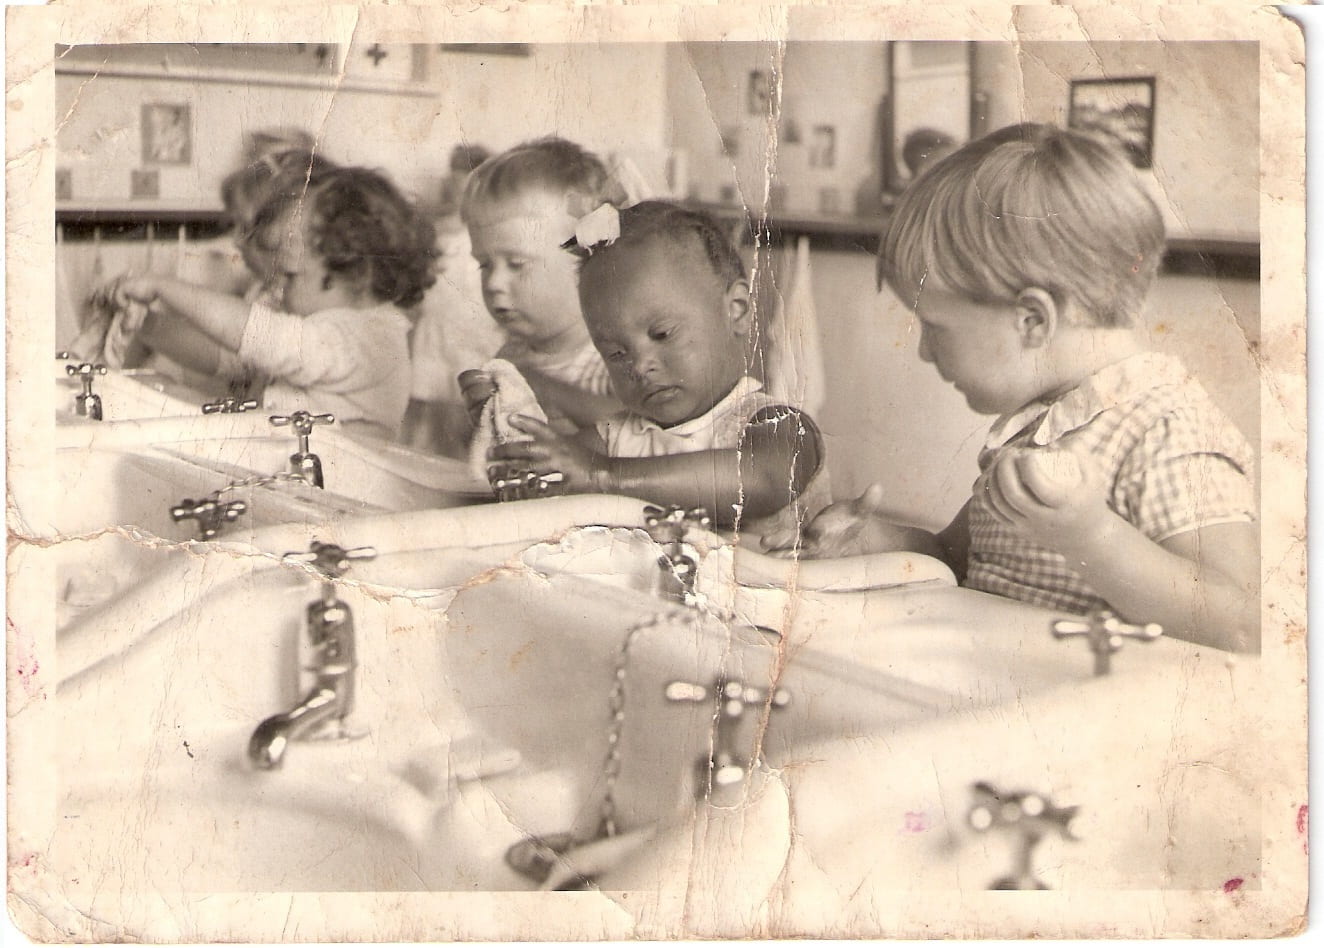 An old sepia photo of children washing up at a row of basins, the child in the centre of the photograph is a young black child, the other children are all white with one boy staring at the black child